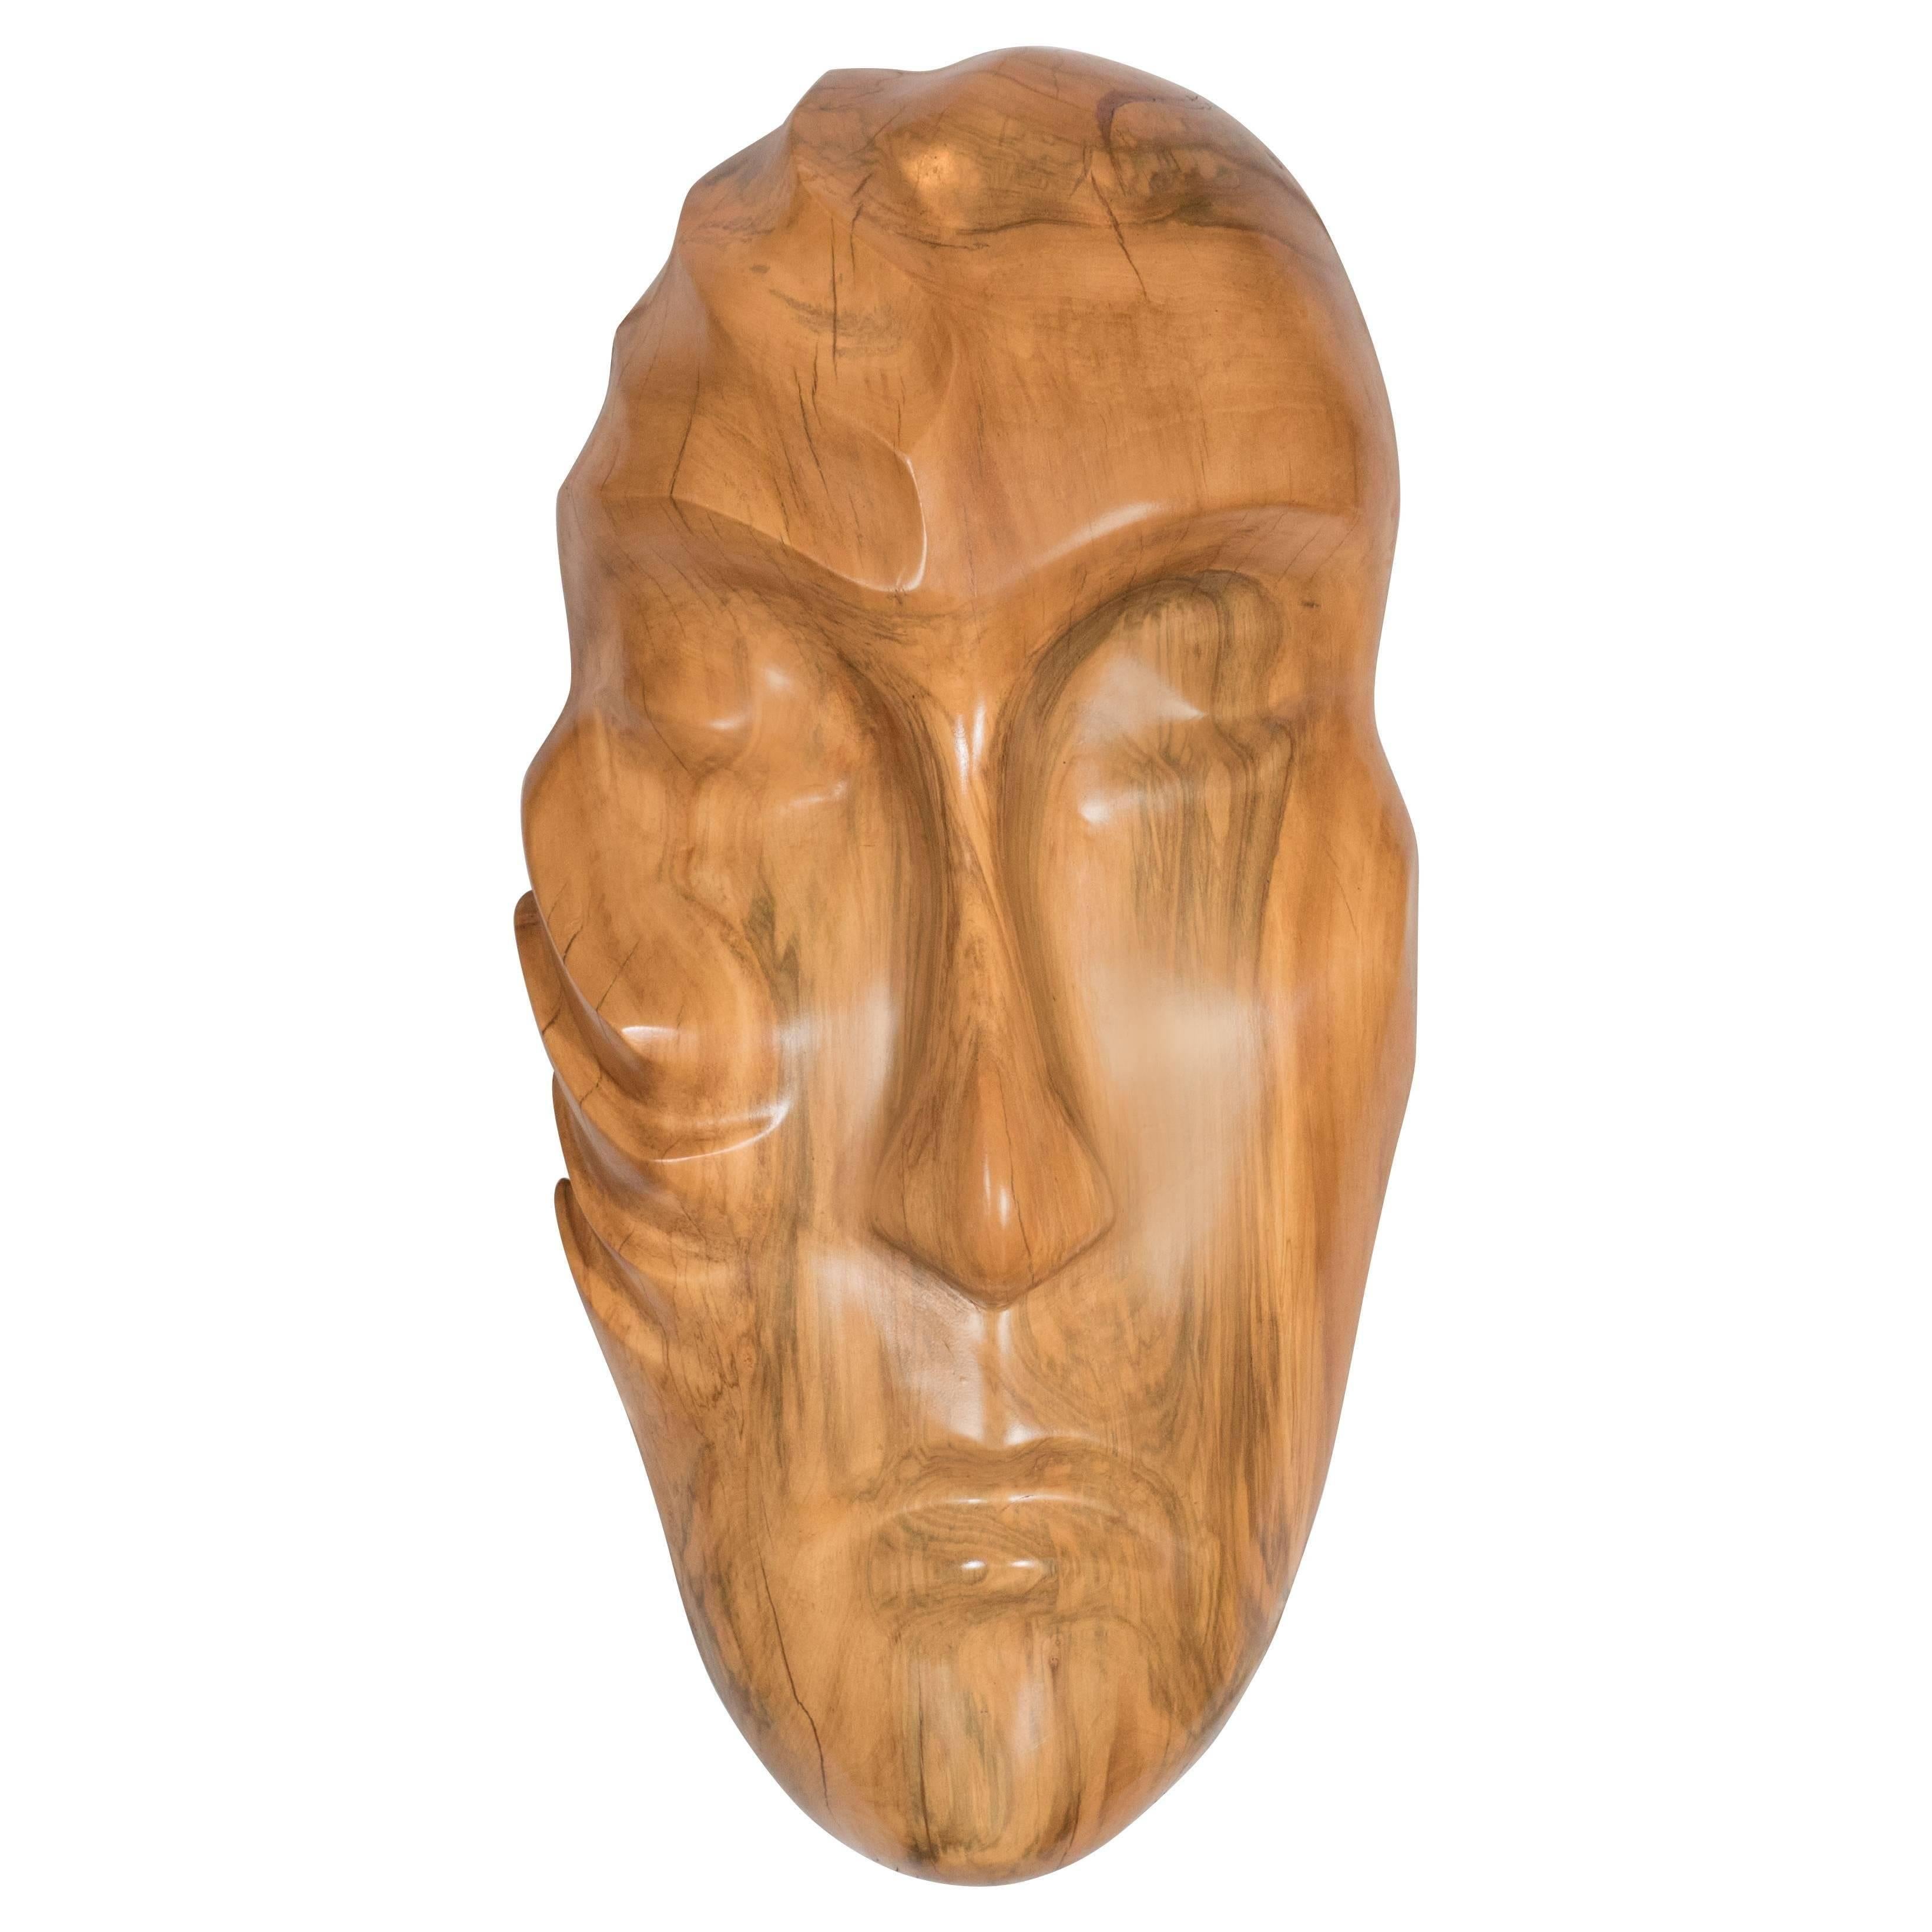 Unknown Figurative Sculpture - Mid-Century Modernist Hand Sculpted Mask in Exotic Wood